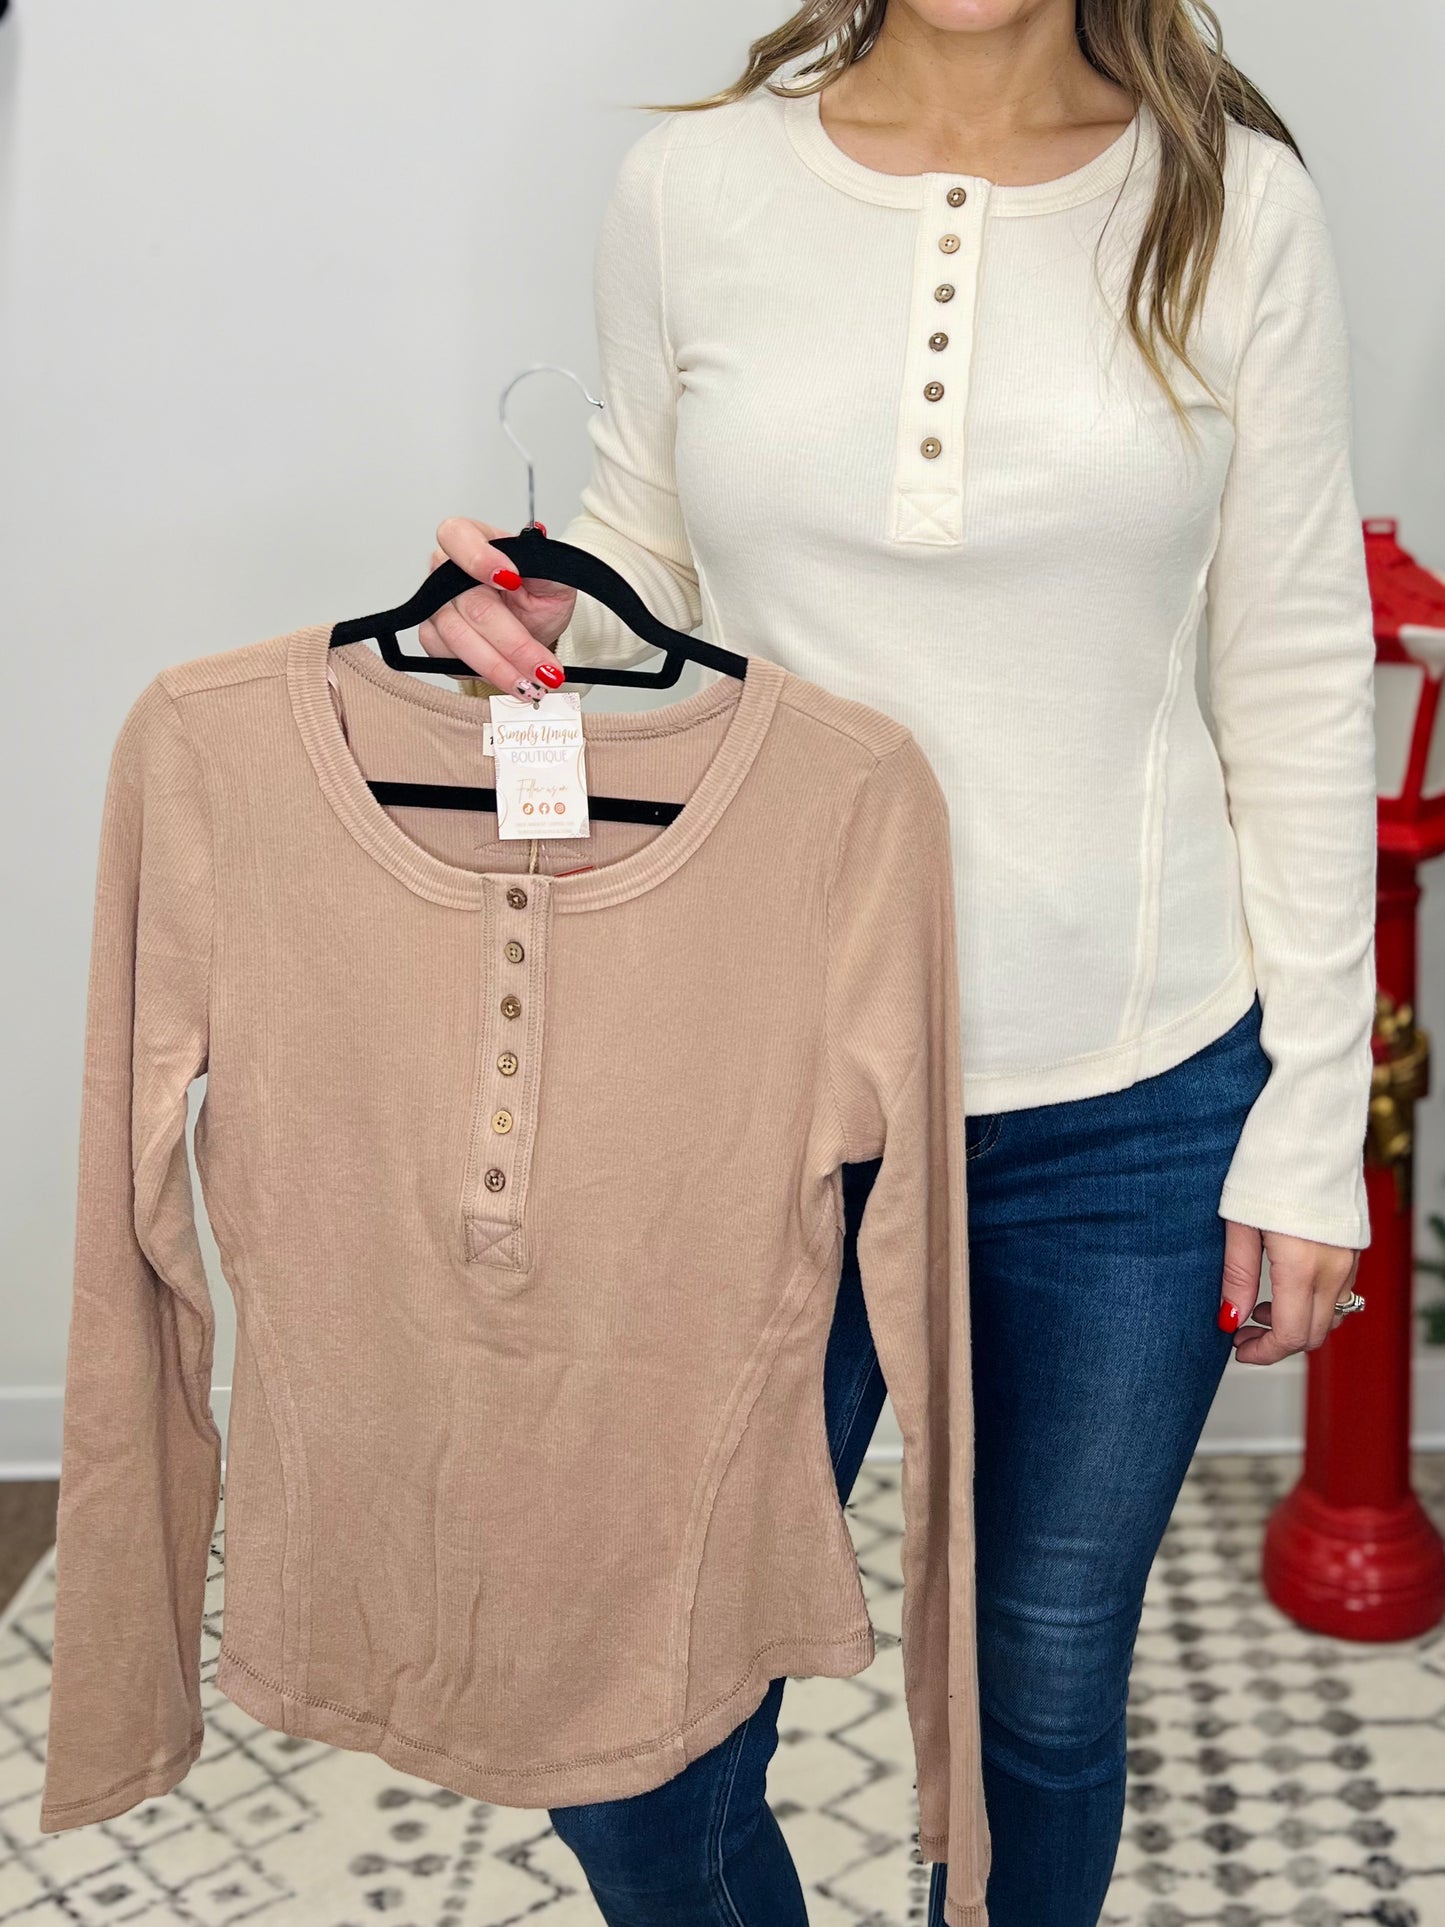 The Soft Brushed Henley Top